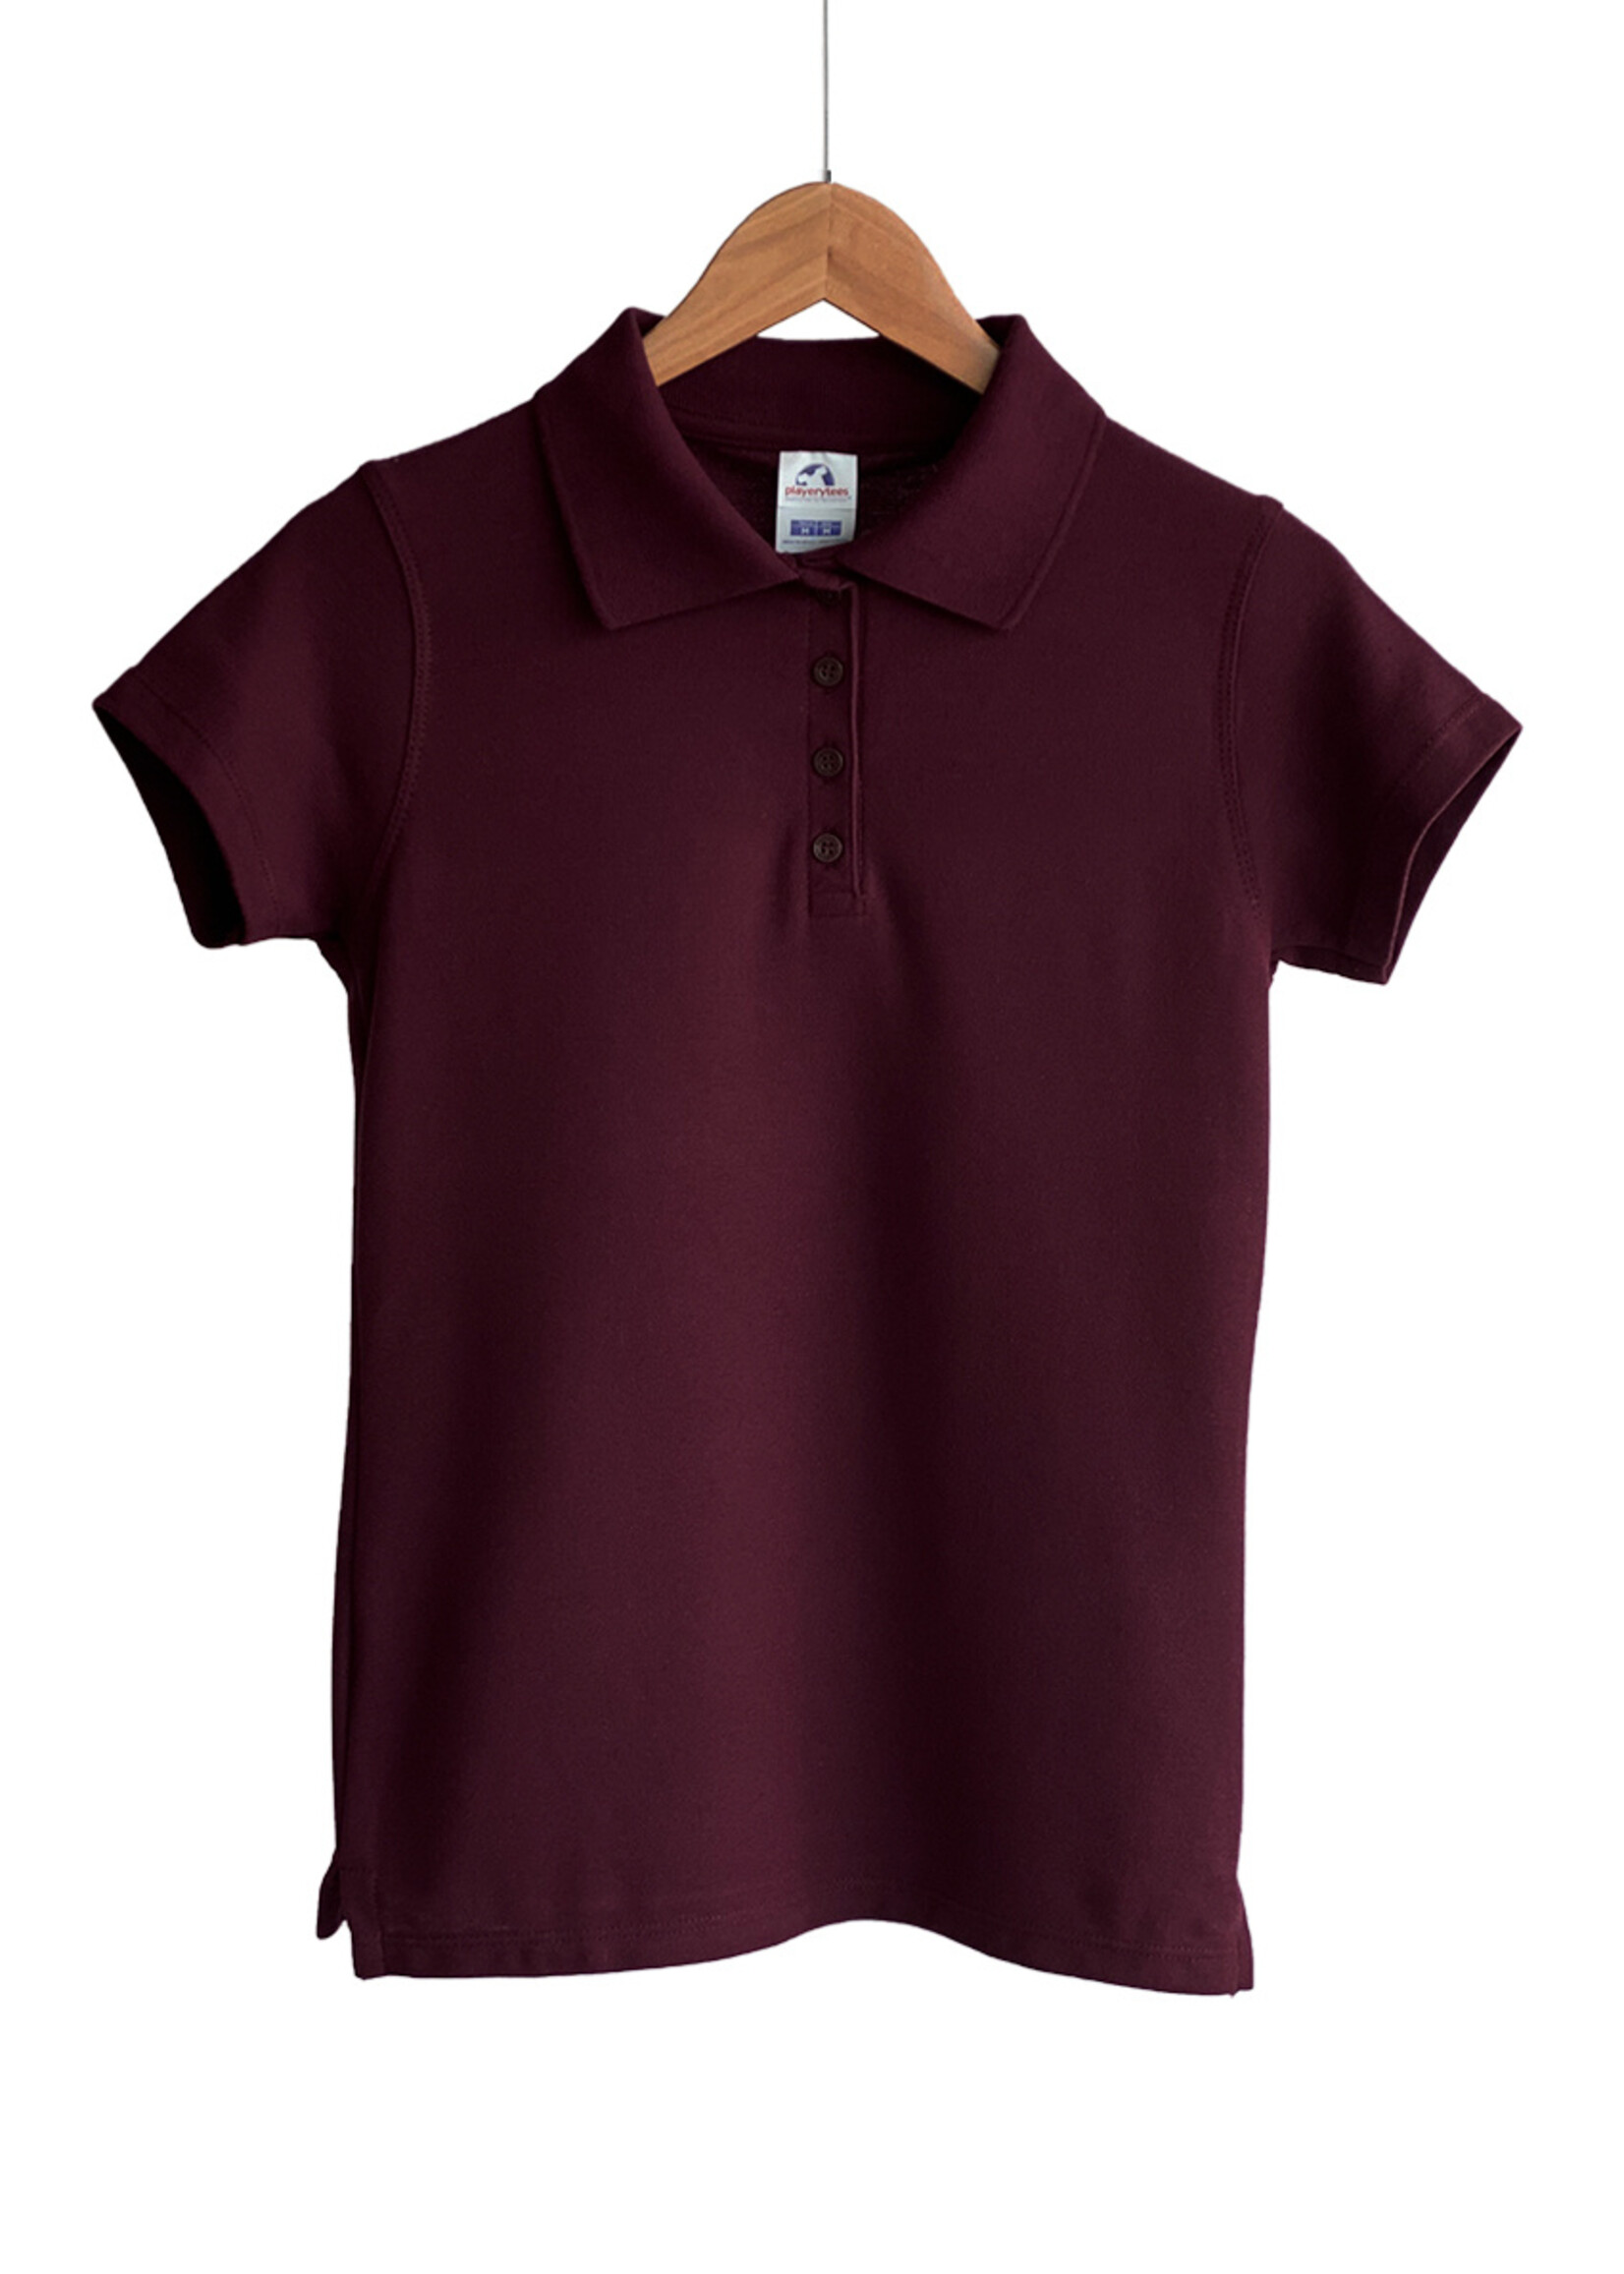 Playerytees STYLE 600D - CARDED POLO 50% COTTON 50% POLYESTER